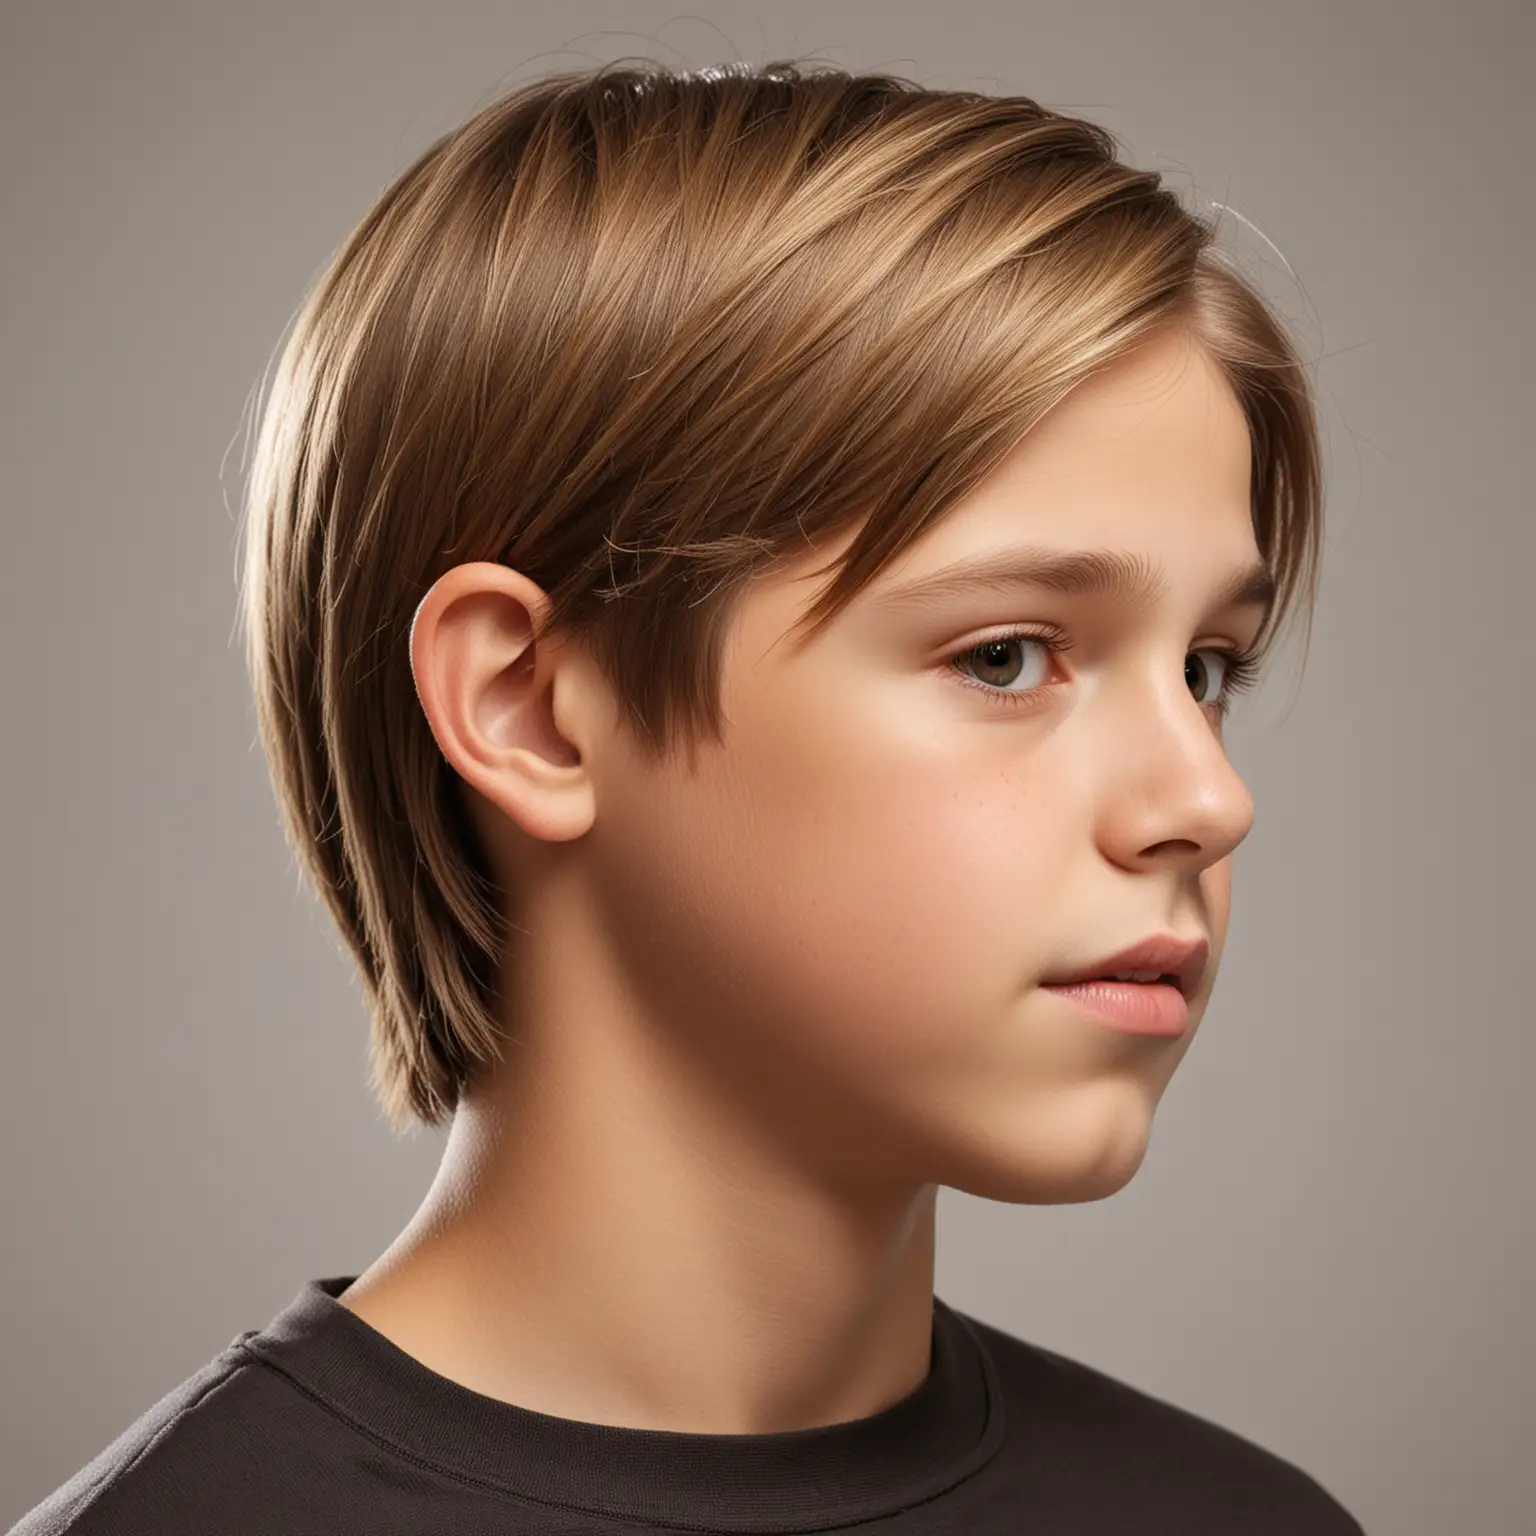 Hyper realistic photo of thirteen year old boy,  smooth neatly combed, straight, flat, shiny shoulder length, light brown hair with highlights, parted on side, overhead, profile view